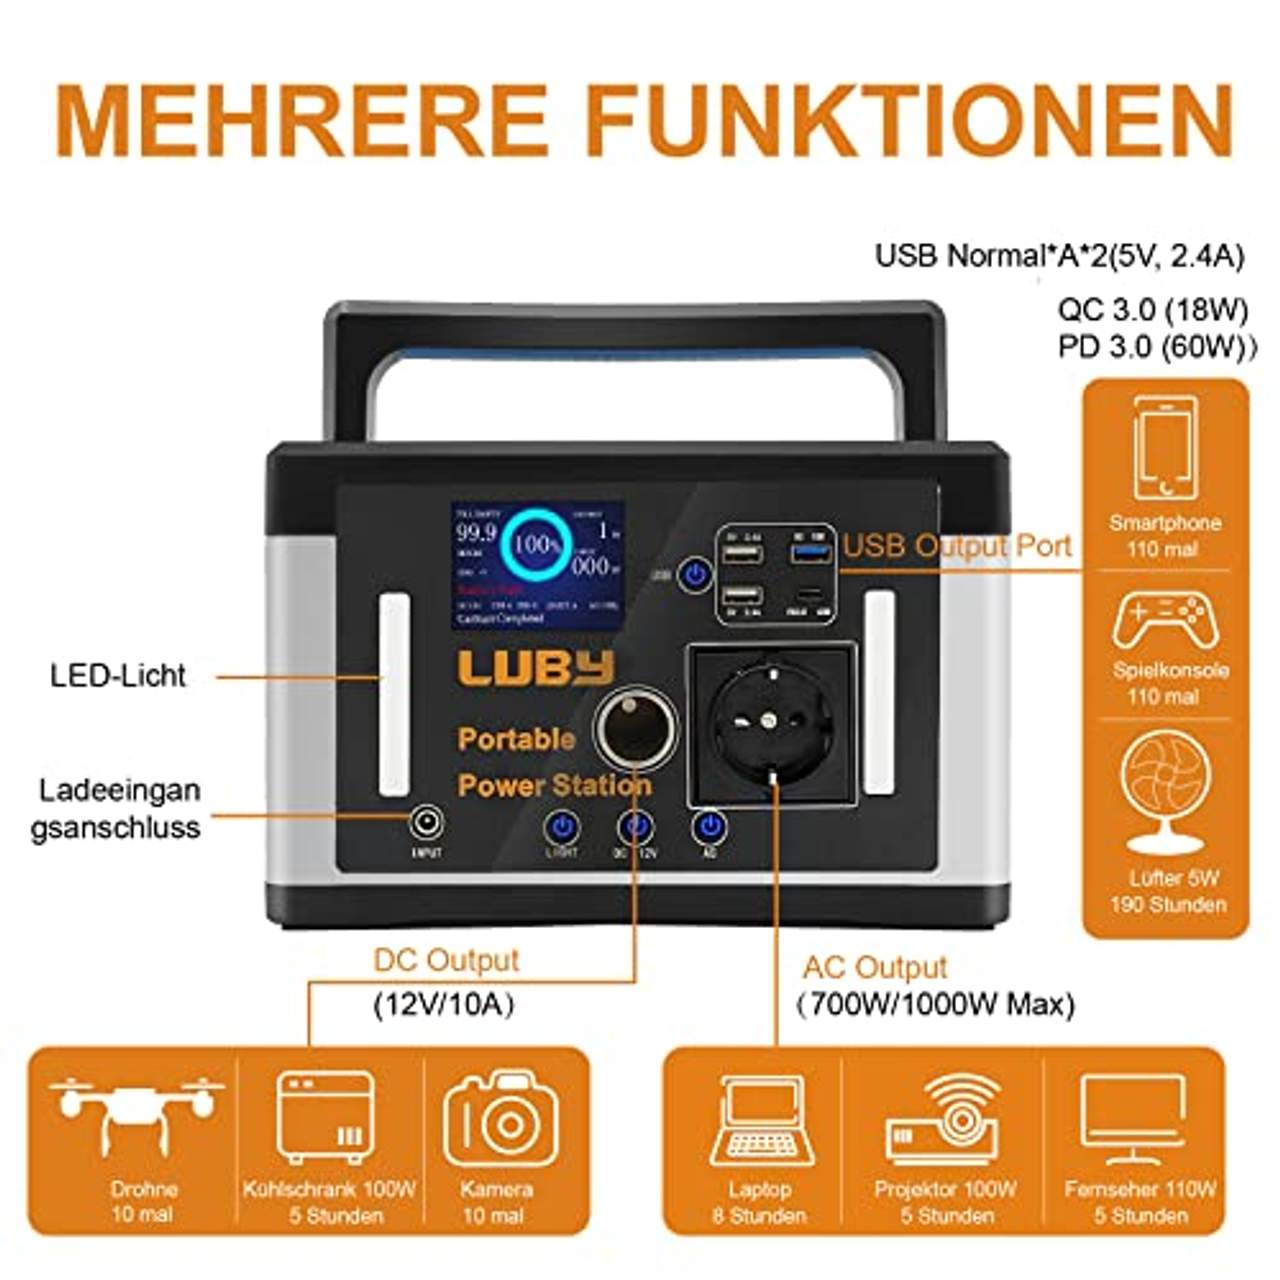 LUBY Portable Power Station